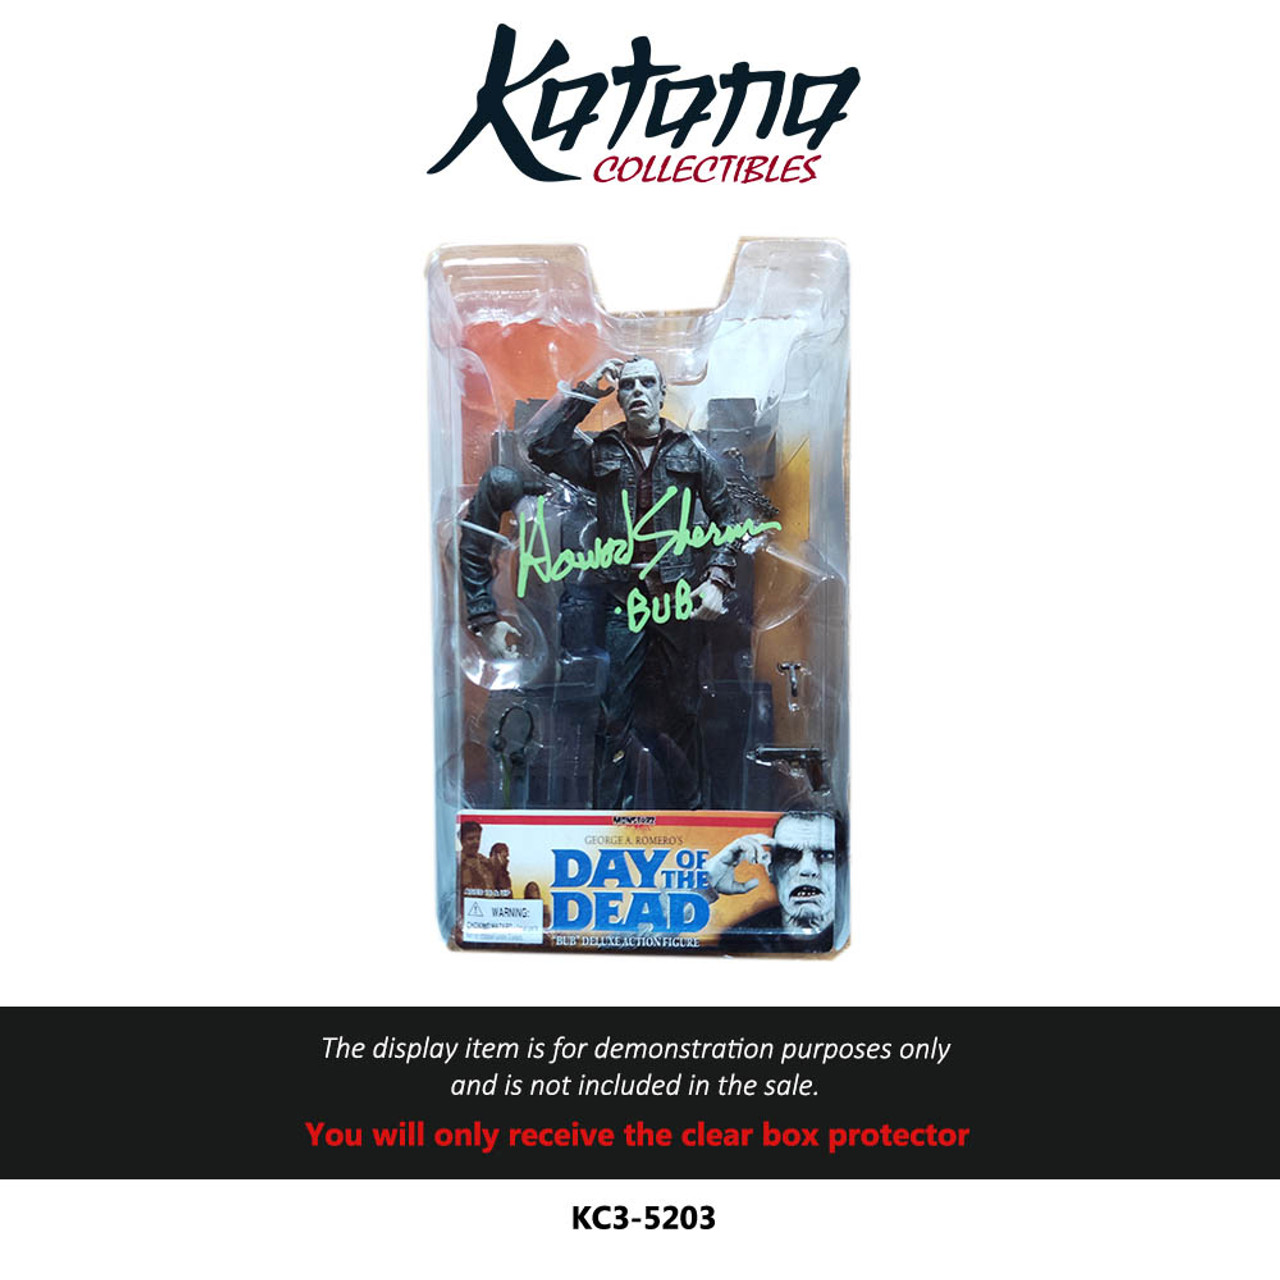 Katana Collectibles Protector For MONSTARZ AMOK TIME DAY OF THE DEAD BUB DELUXE ACTION FIGURE 2008